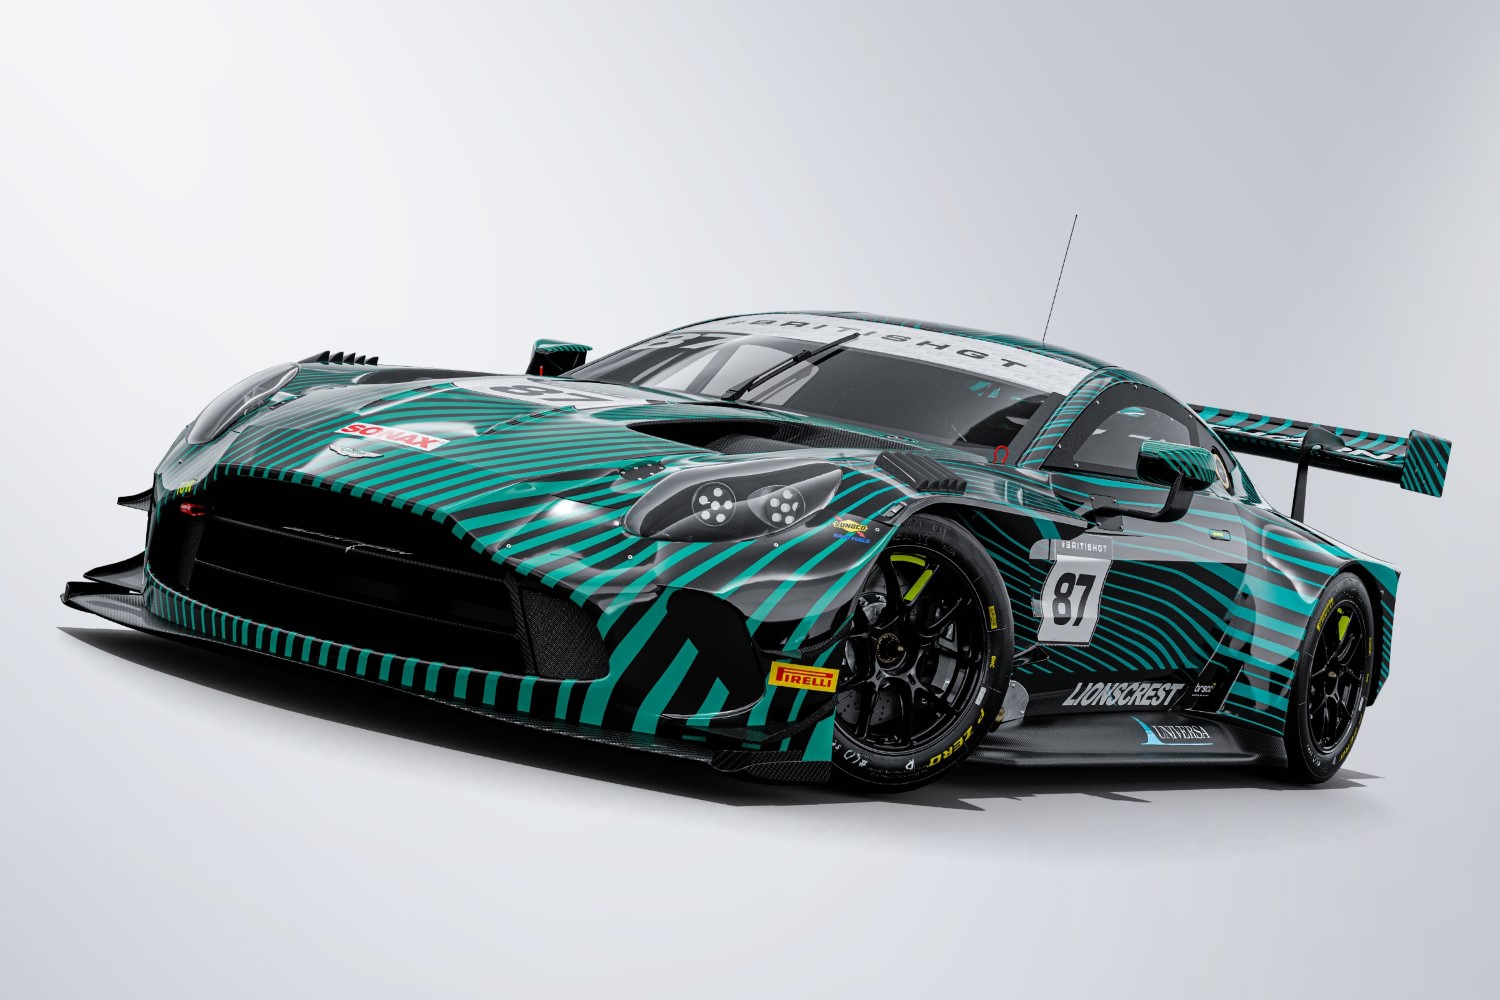 Aston Martin’s GT-Filled Charge To The British GT Championship